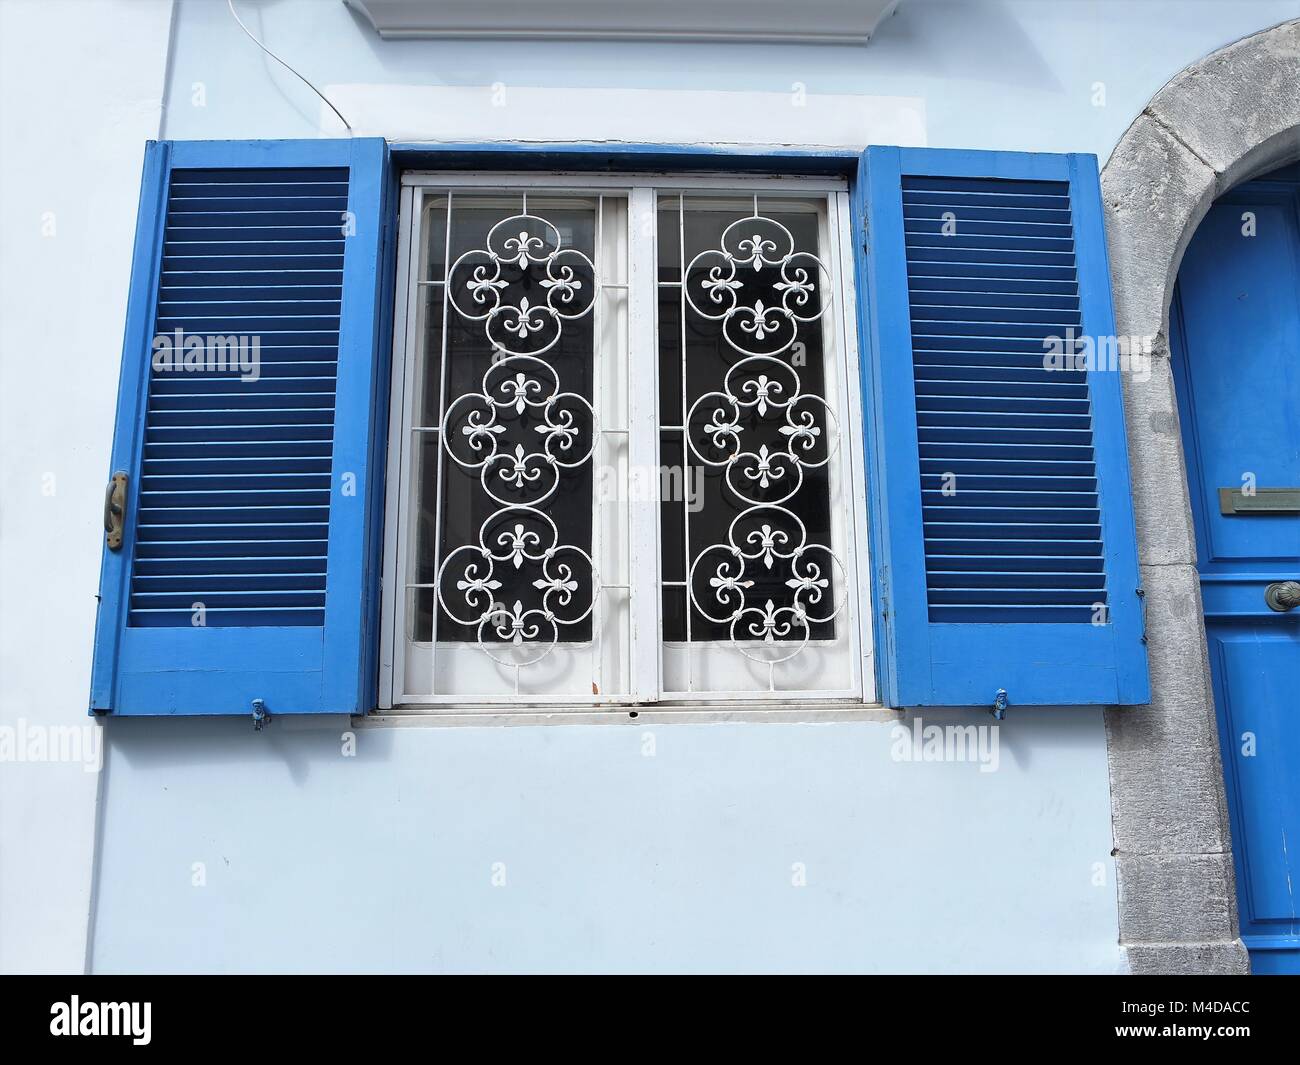 Windows with grilles and window shutters Stock Photo